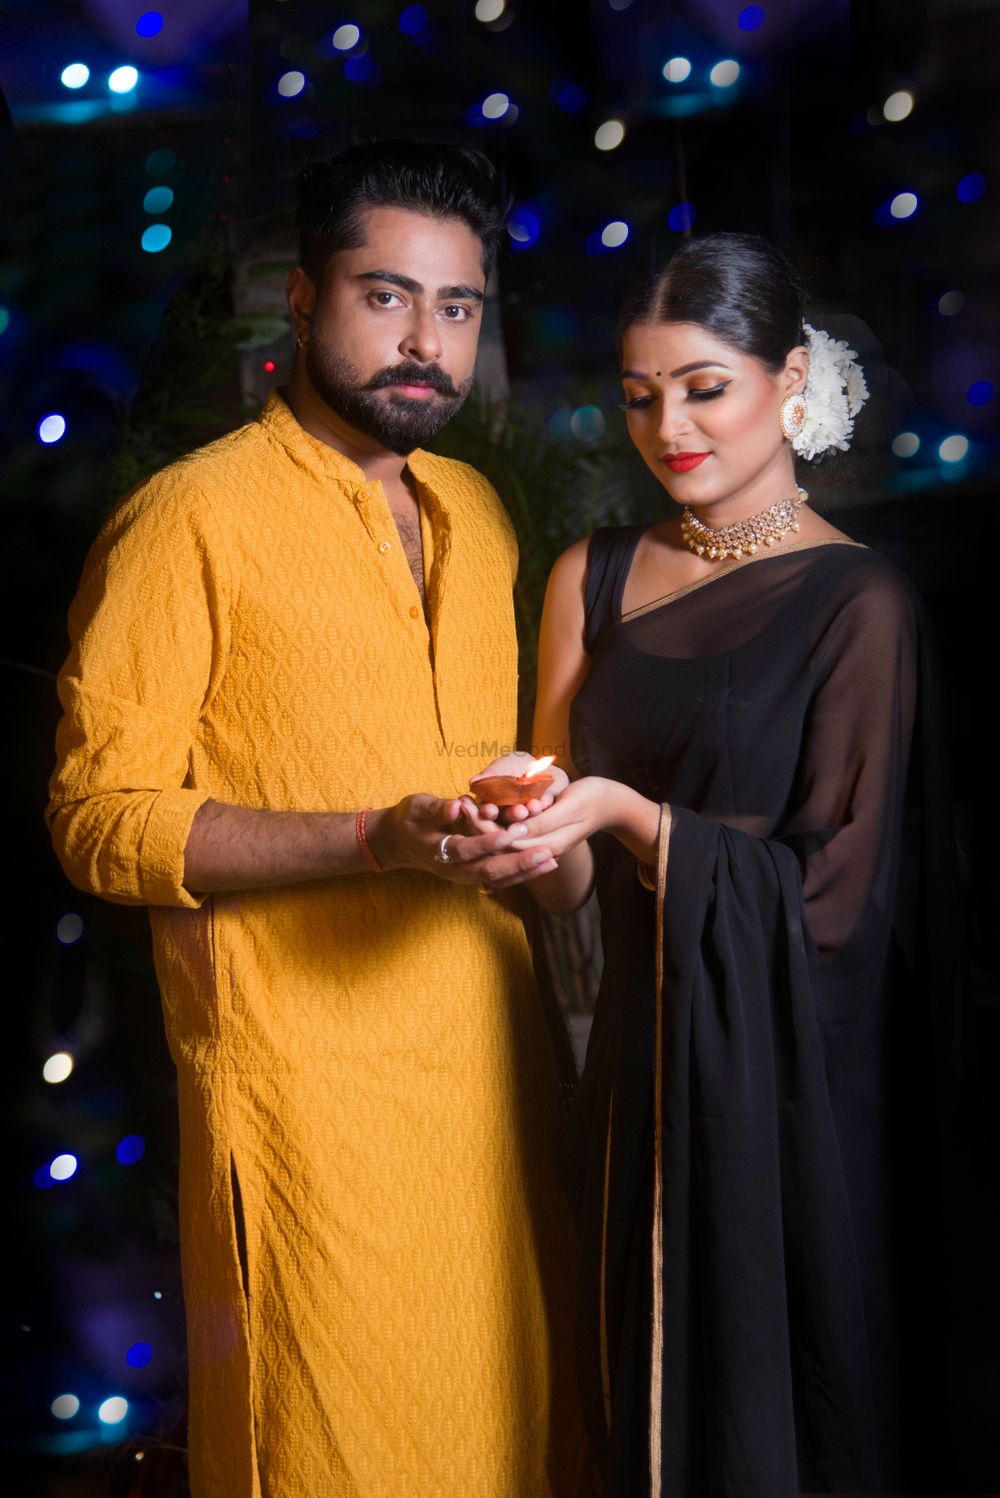 Photo From Diwali theme - By Sonu Makeup Artist